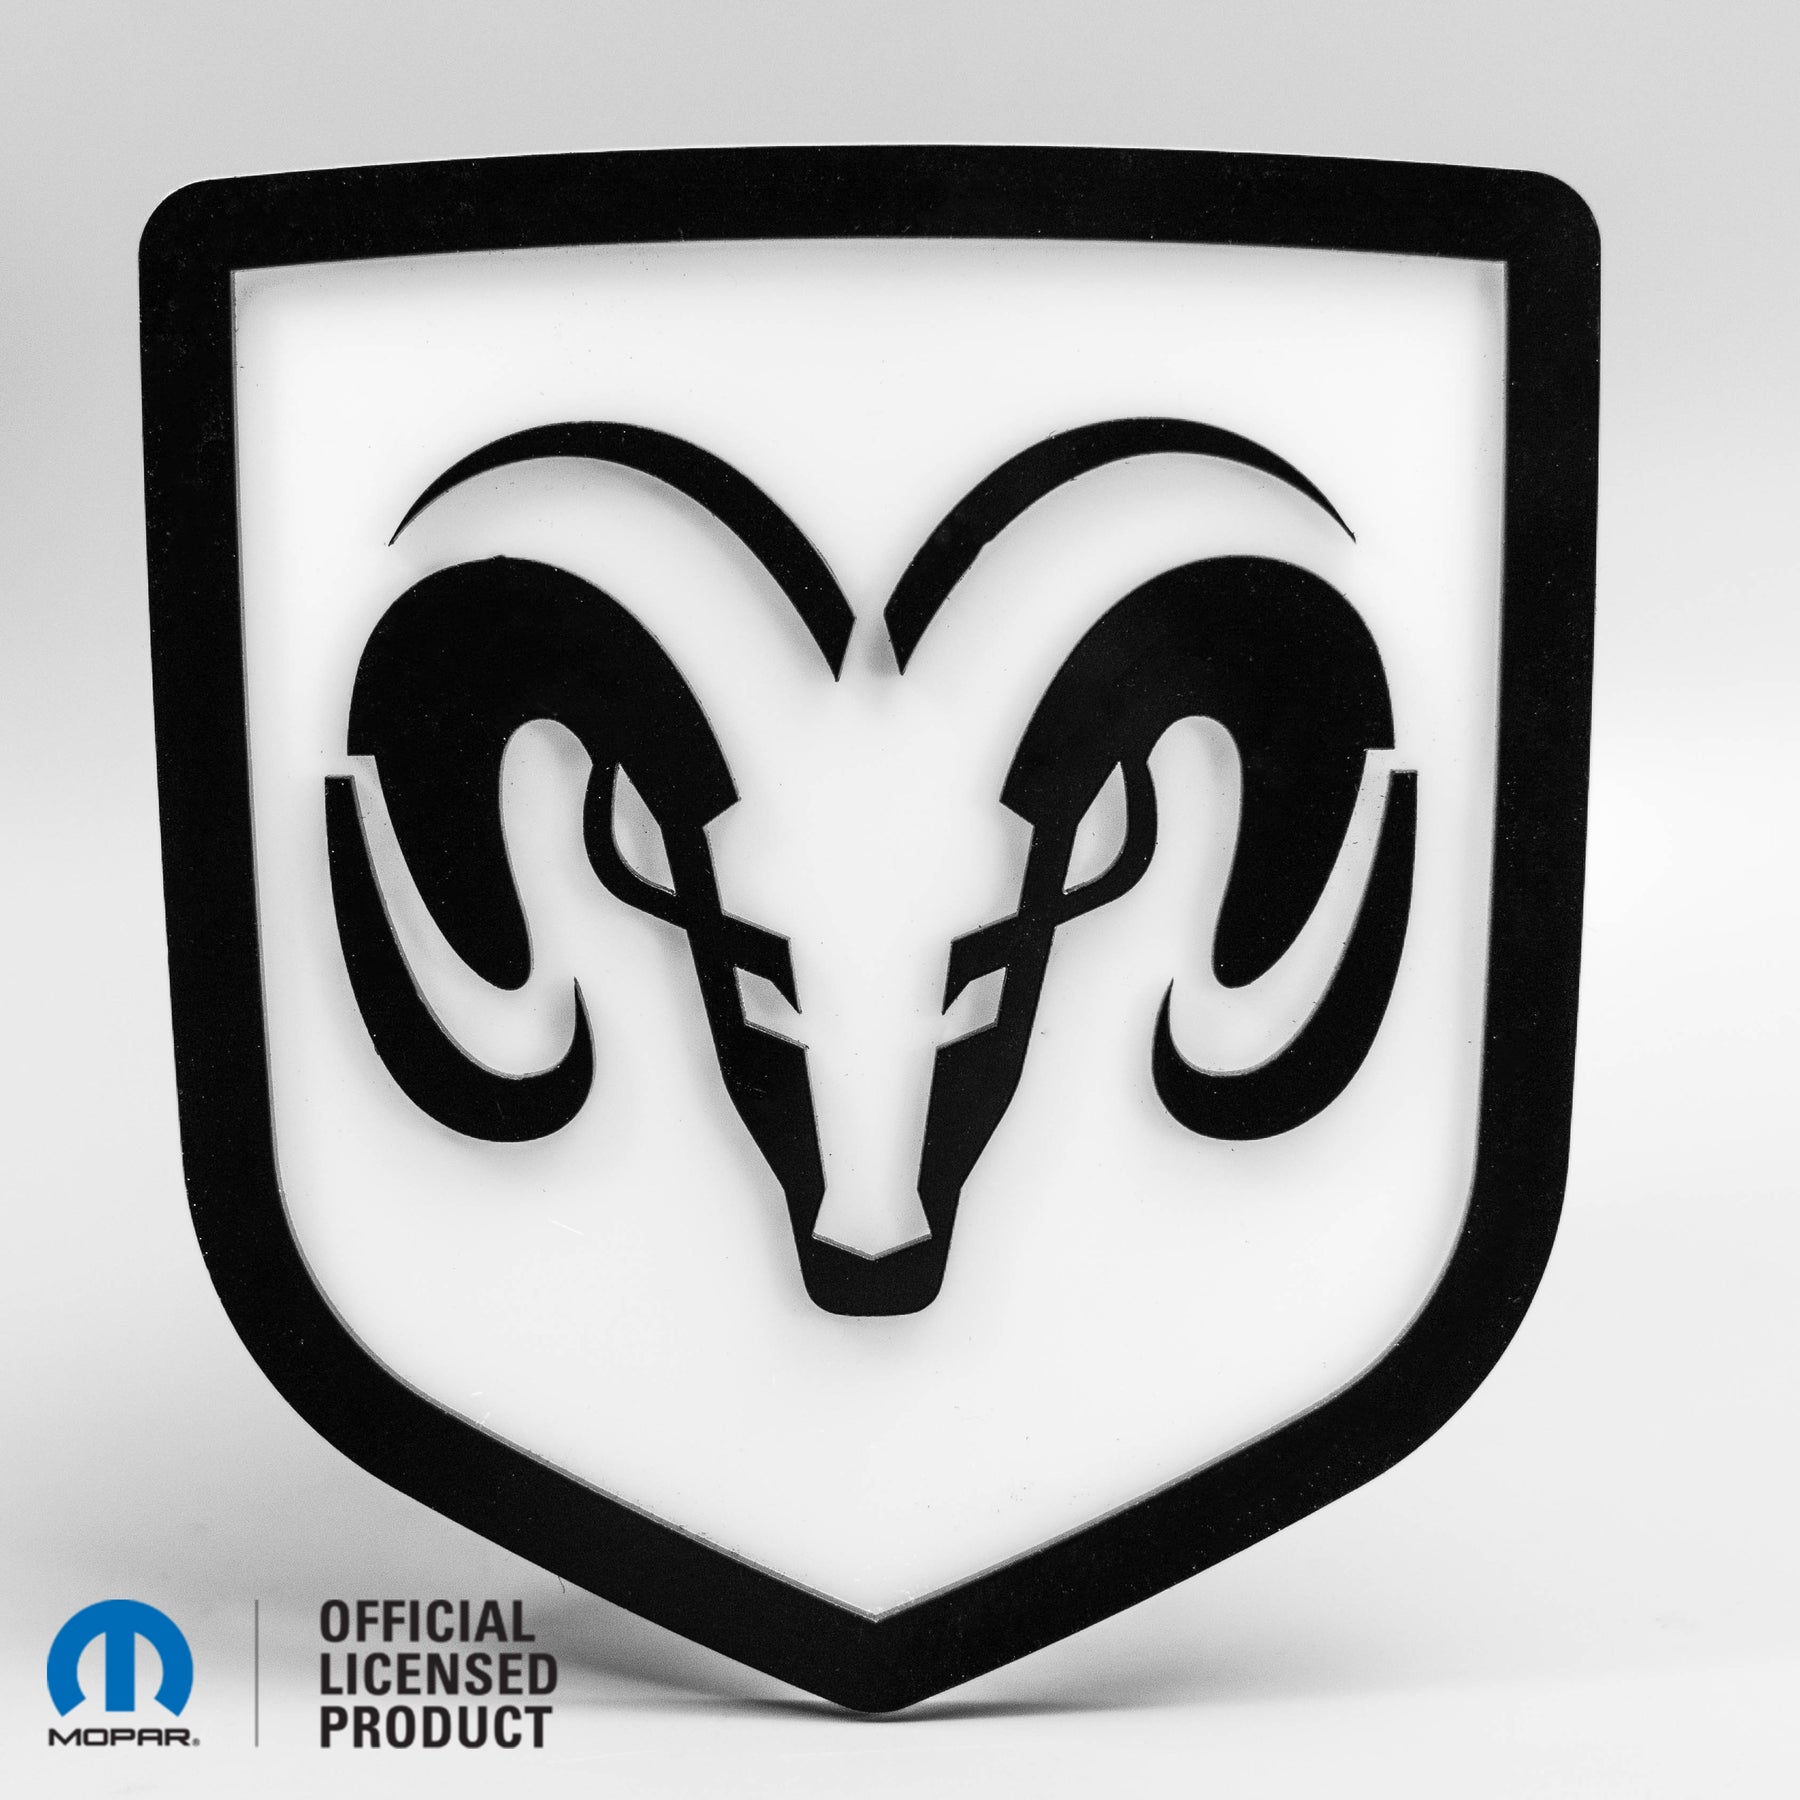 RAM® HEAD LOGO STYLE 1 TAILGATE BADGE - FITS 2009-2018 DODGE® RAM® TAILGATE -1500, 2500, 3500 - GLOSS ON WHITE - Officially Licensed Product